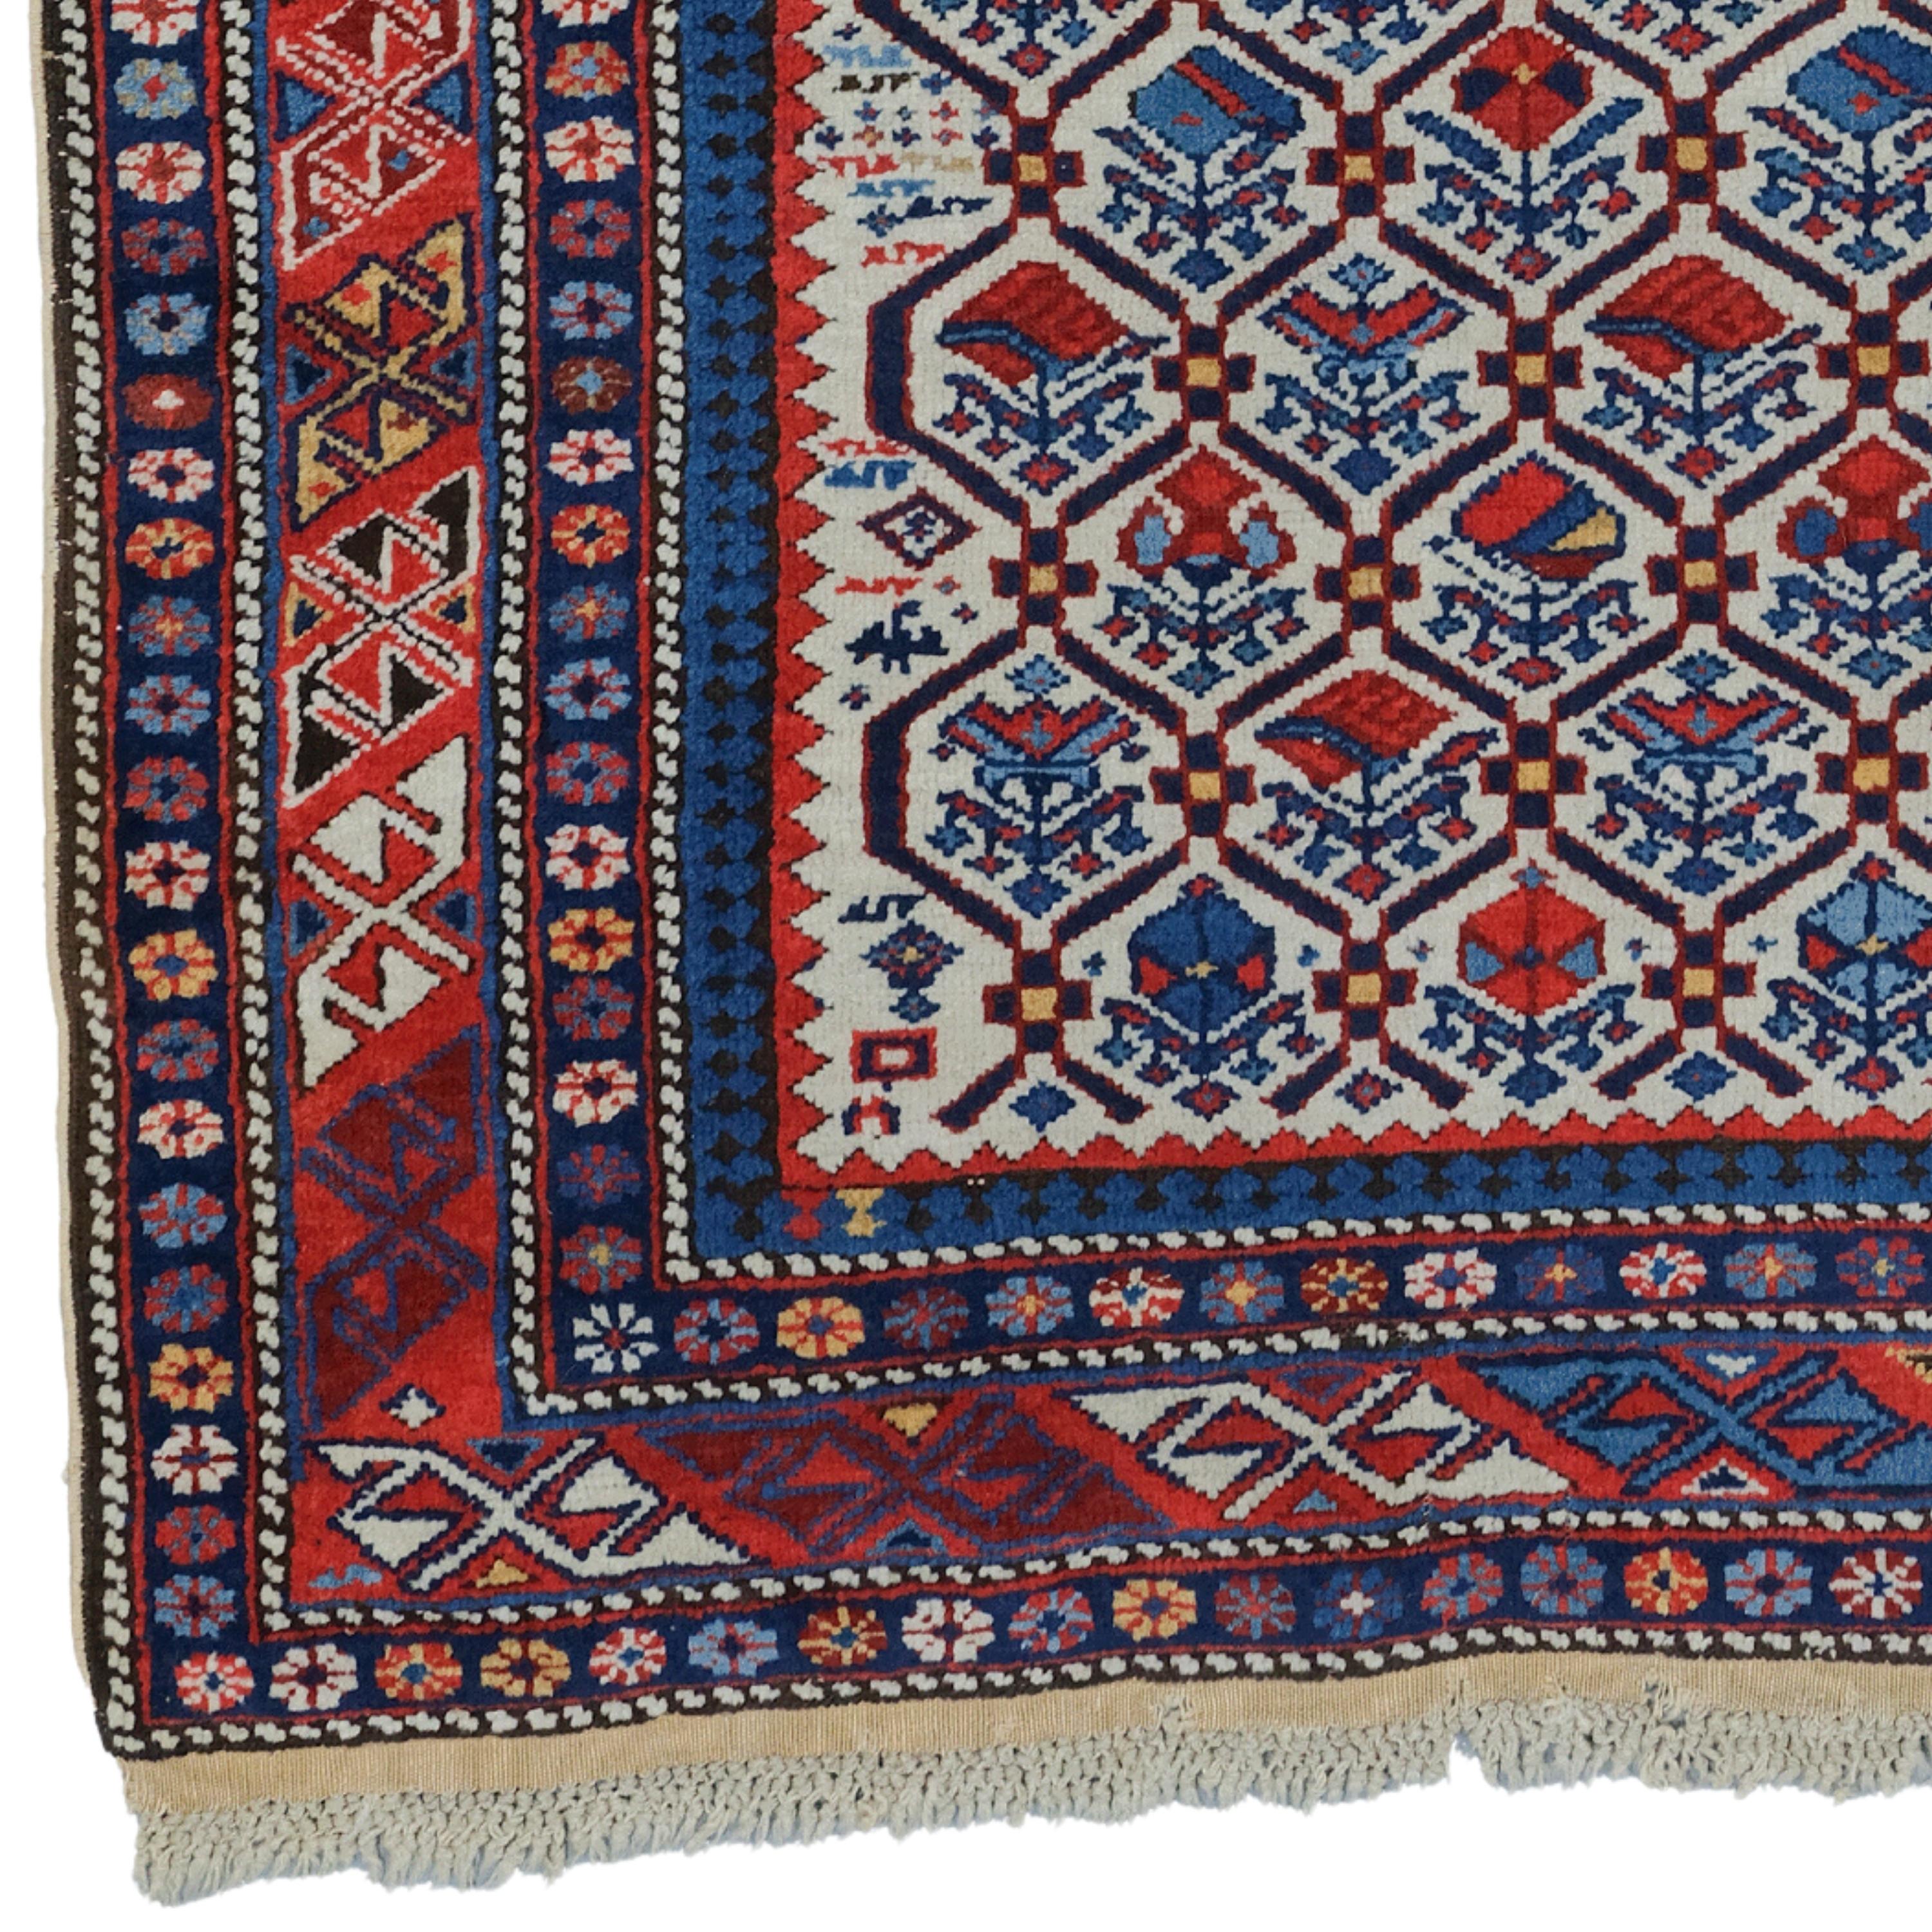 Art from Beyond Time: 19th Century Antique Caucasian Shirvan Carpet

A unique opportunity for art and history lovers! This antique Caucasian Shirvan carpet brings the elegance and handcraftsmanship of the 19th century to the present day. With its